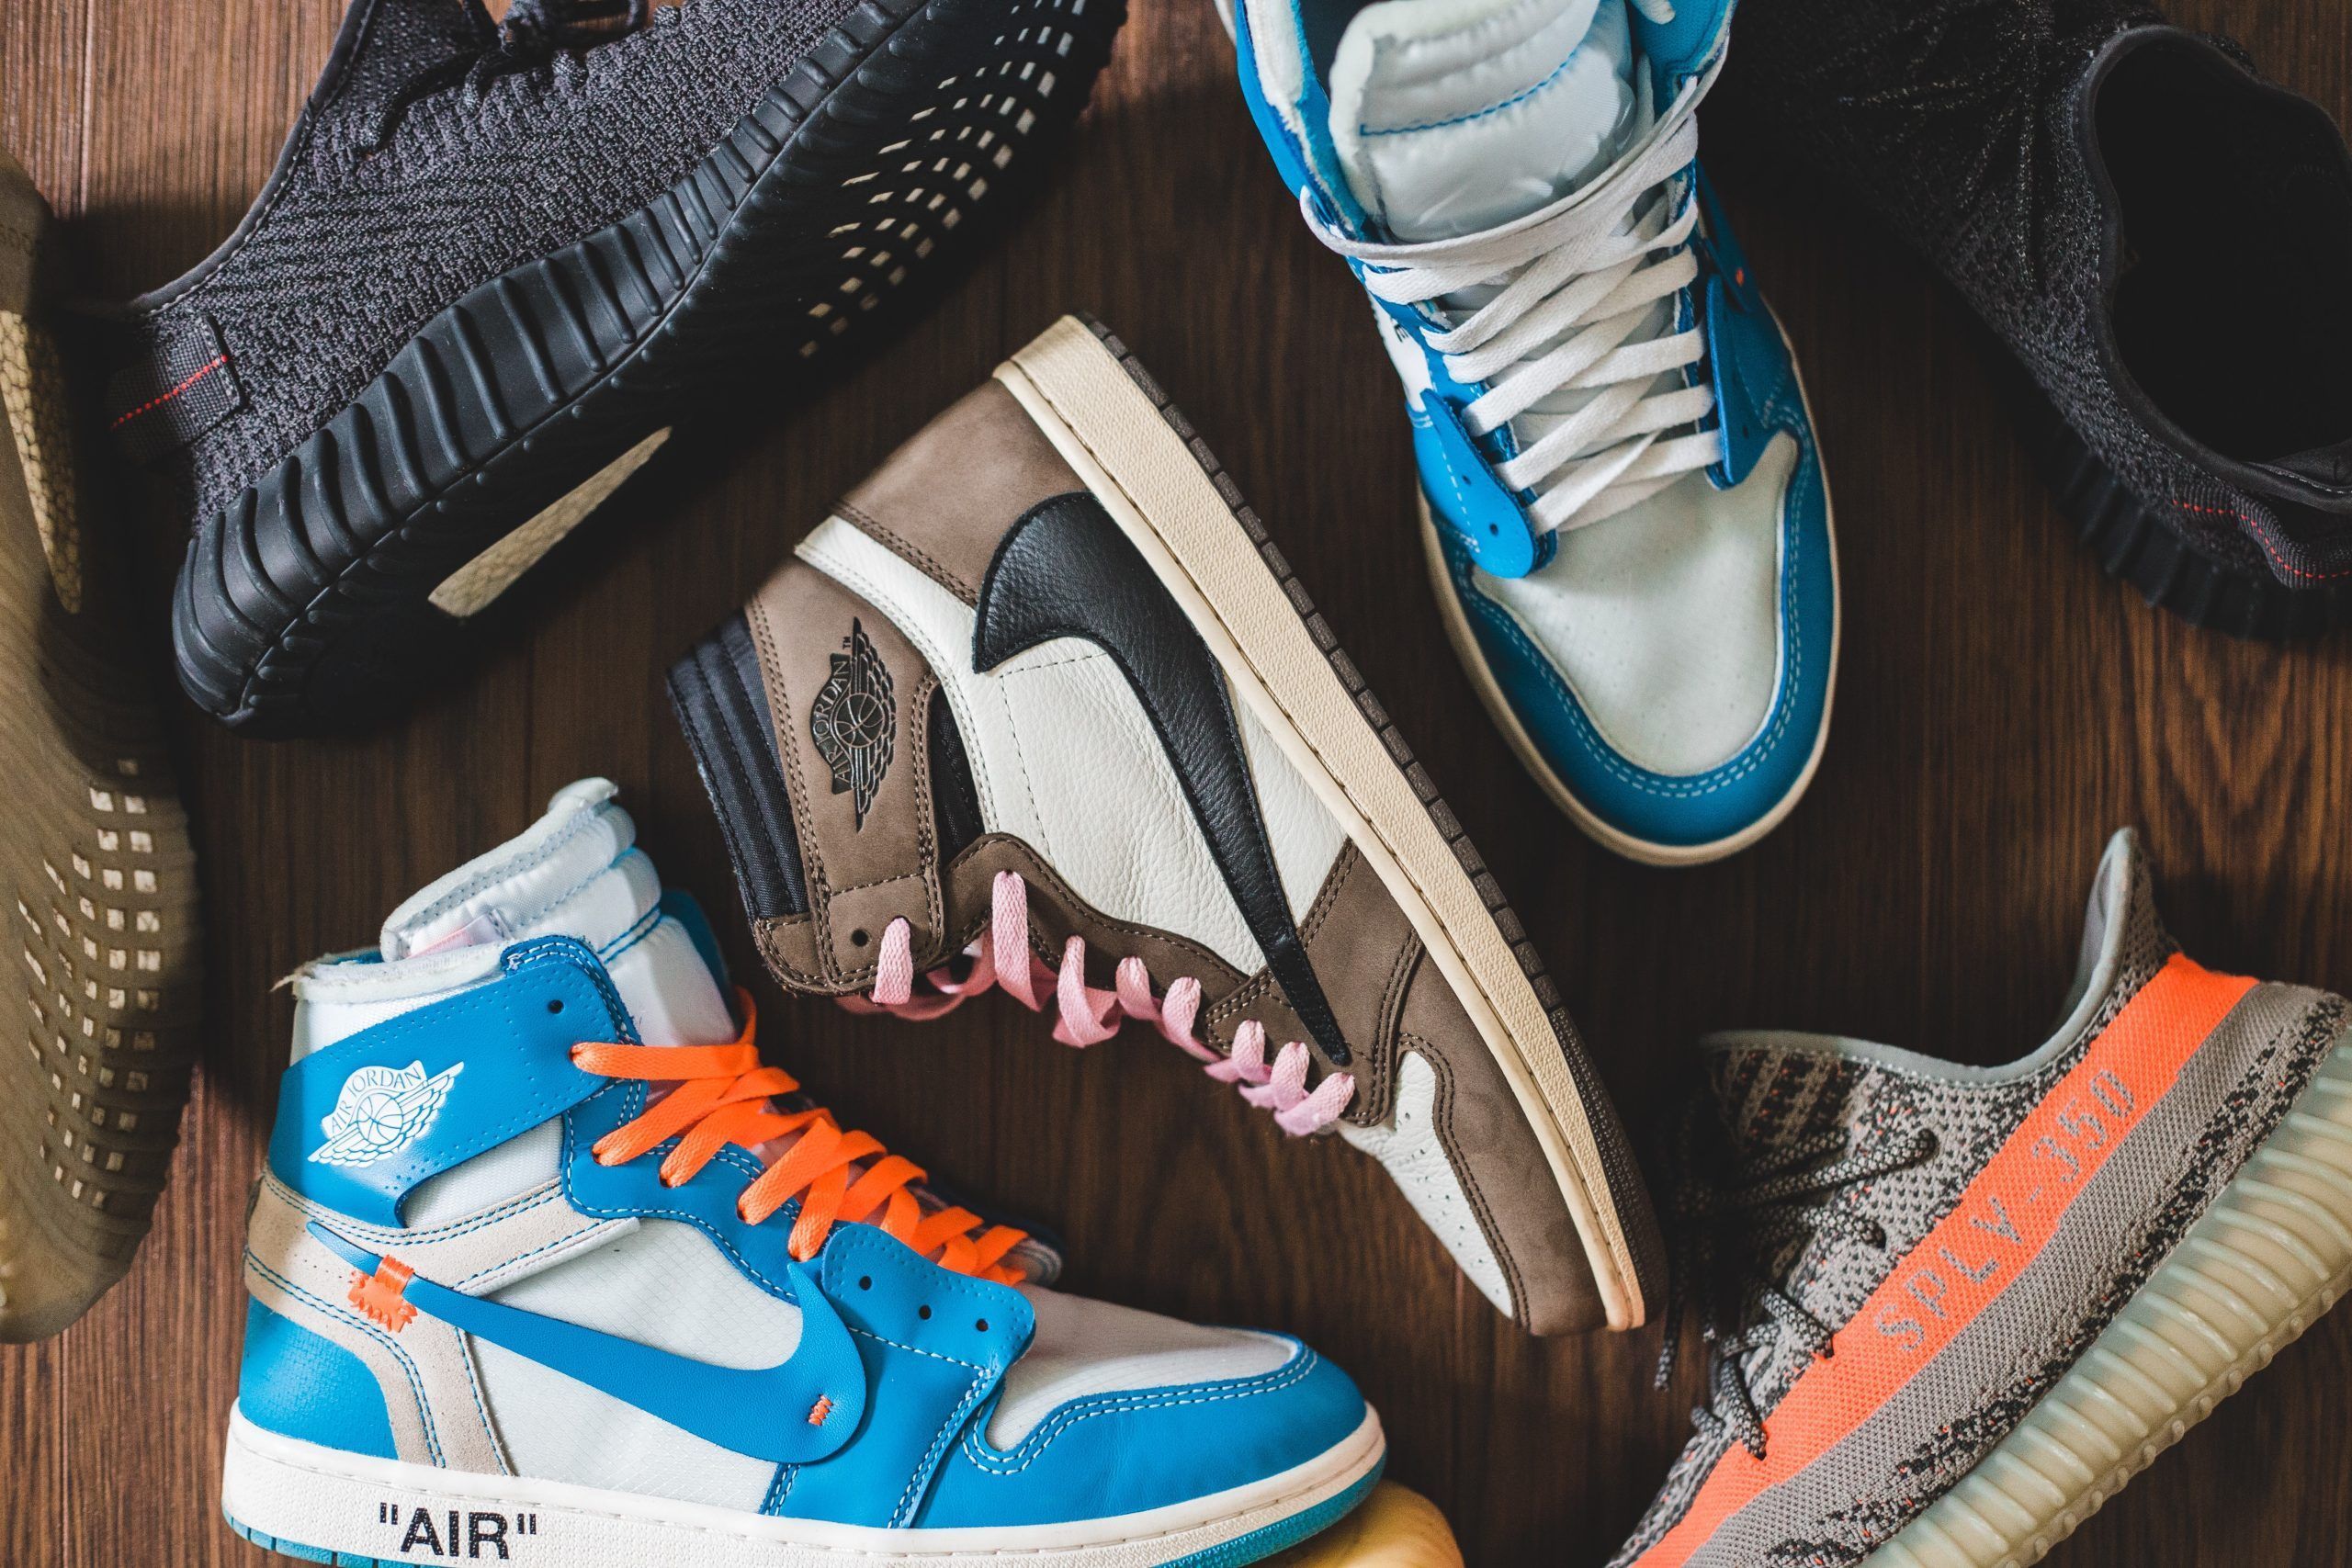 SEA Is Hosting The First Sneaker Con In Singapore This April